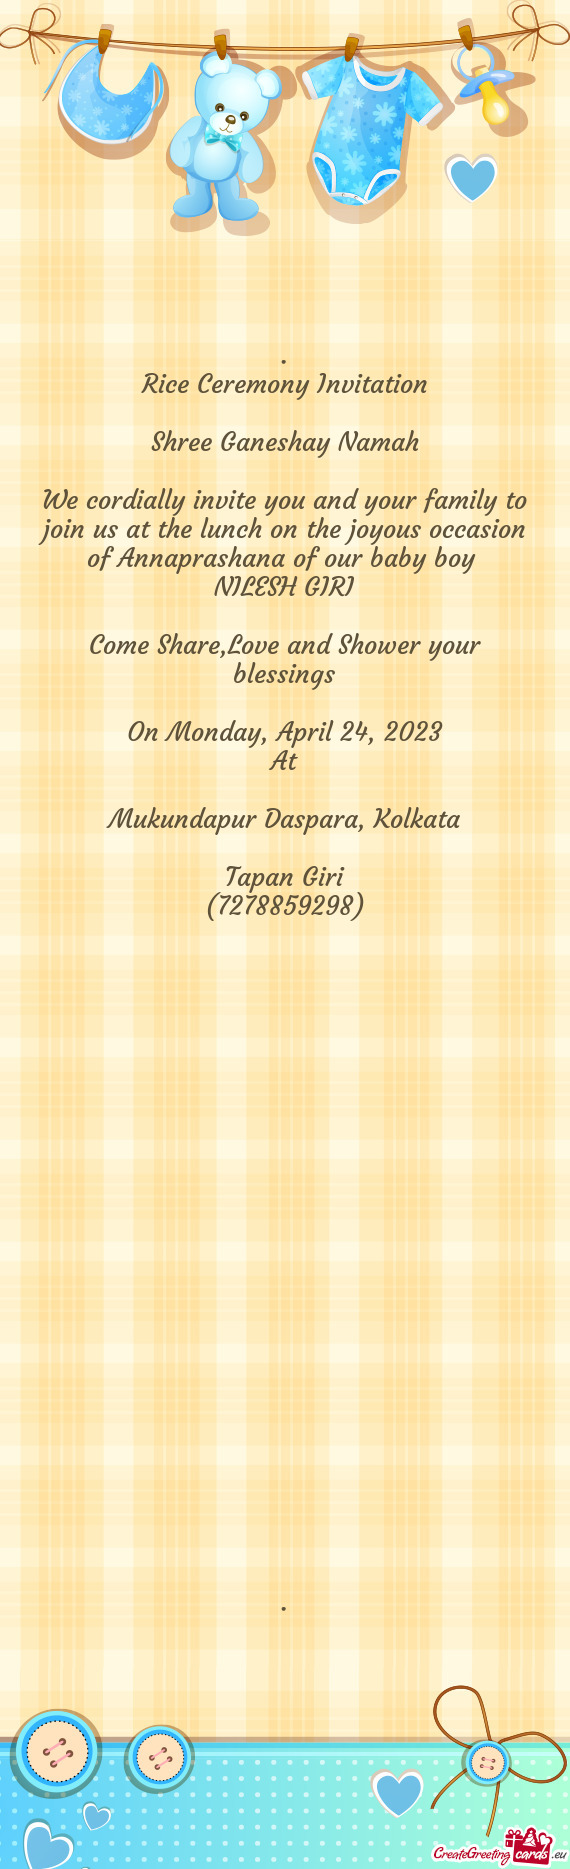 We cordially invite you and your family to join us at the lunch on the joyous occasion of Annaprasha